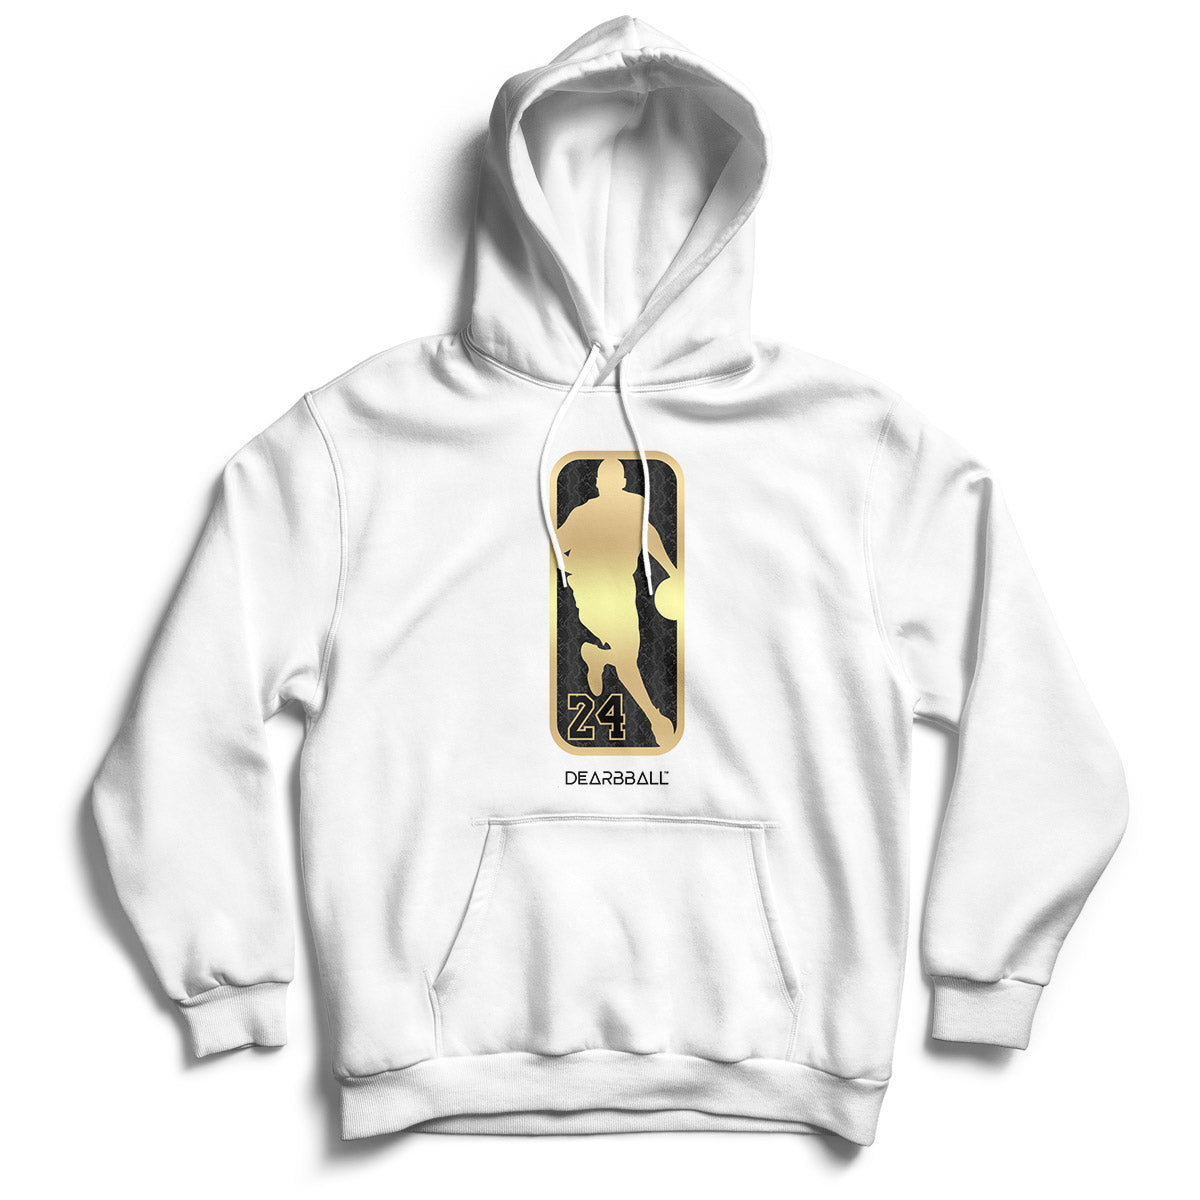 DearBBall Hoodie - Mamba Gold Logo Special Edition - DearBBall™